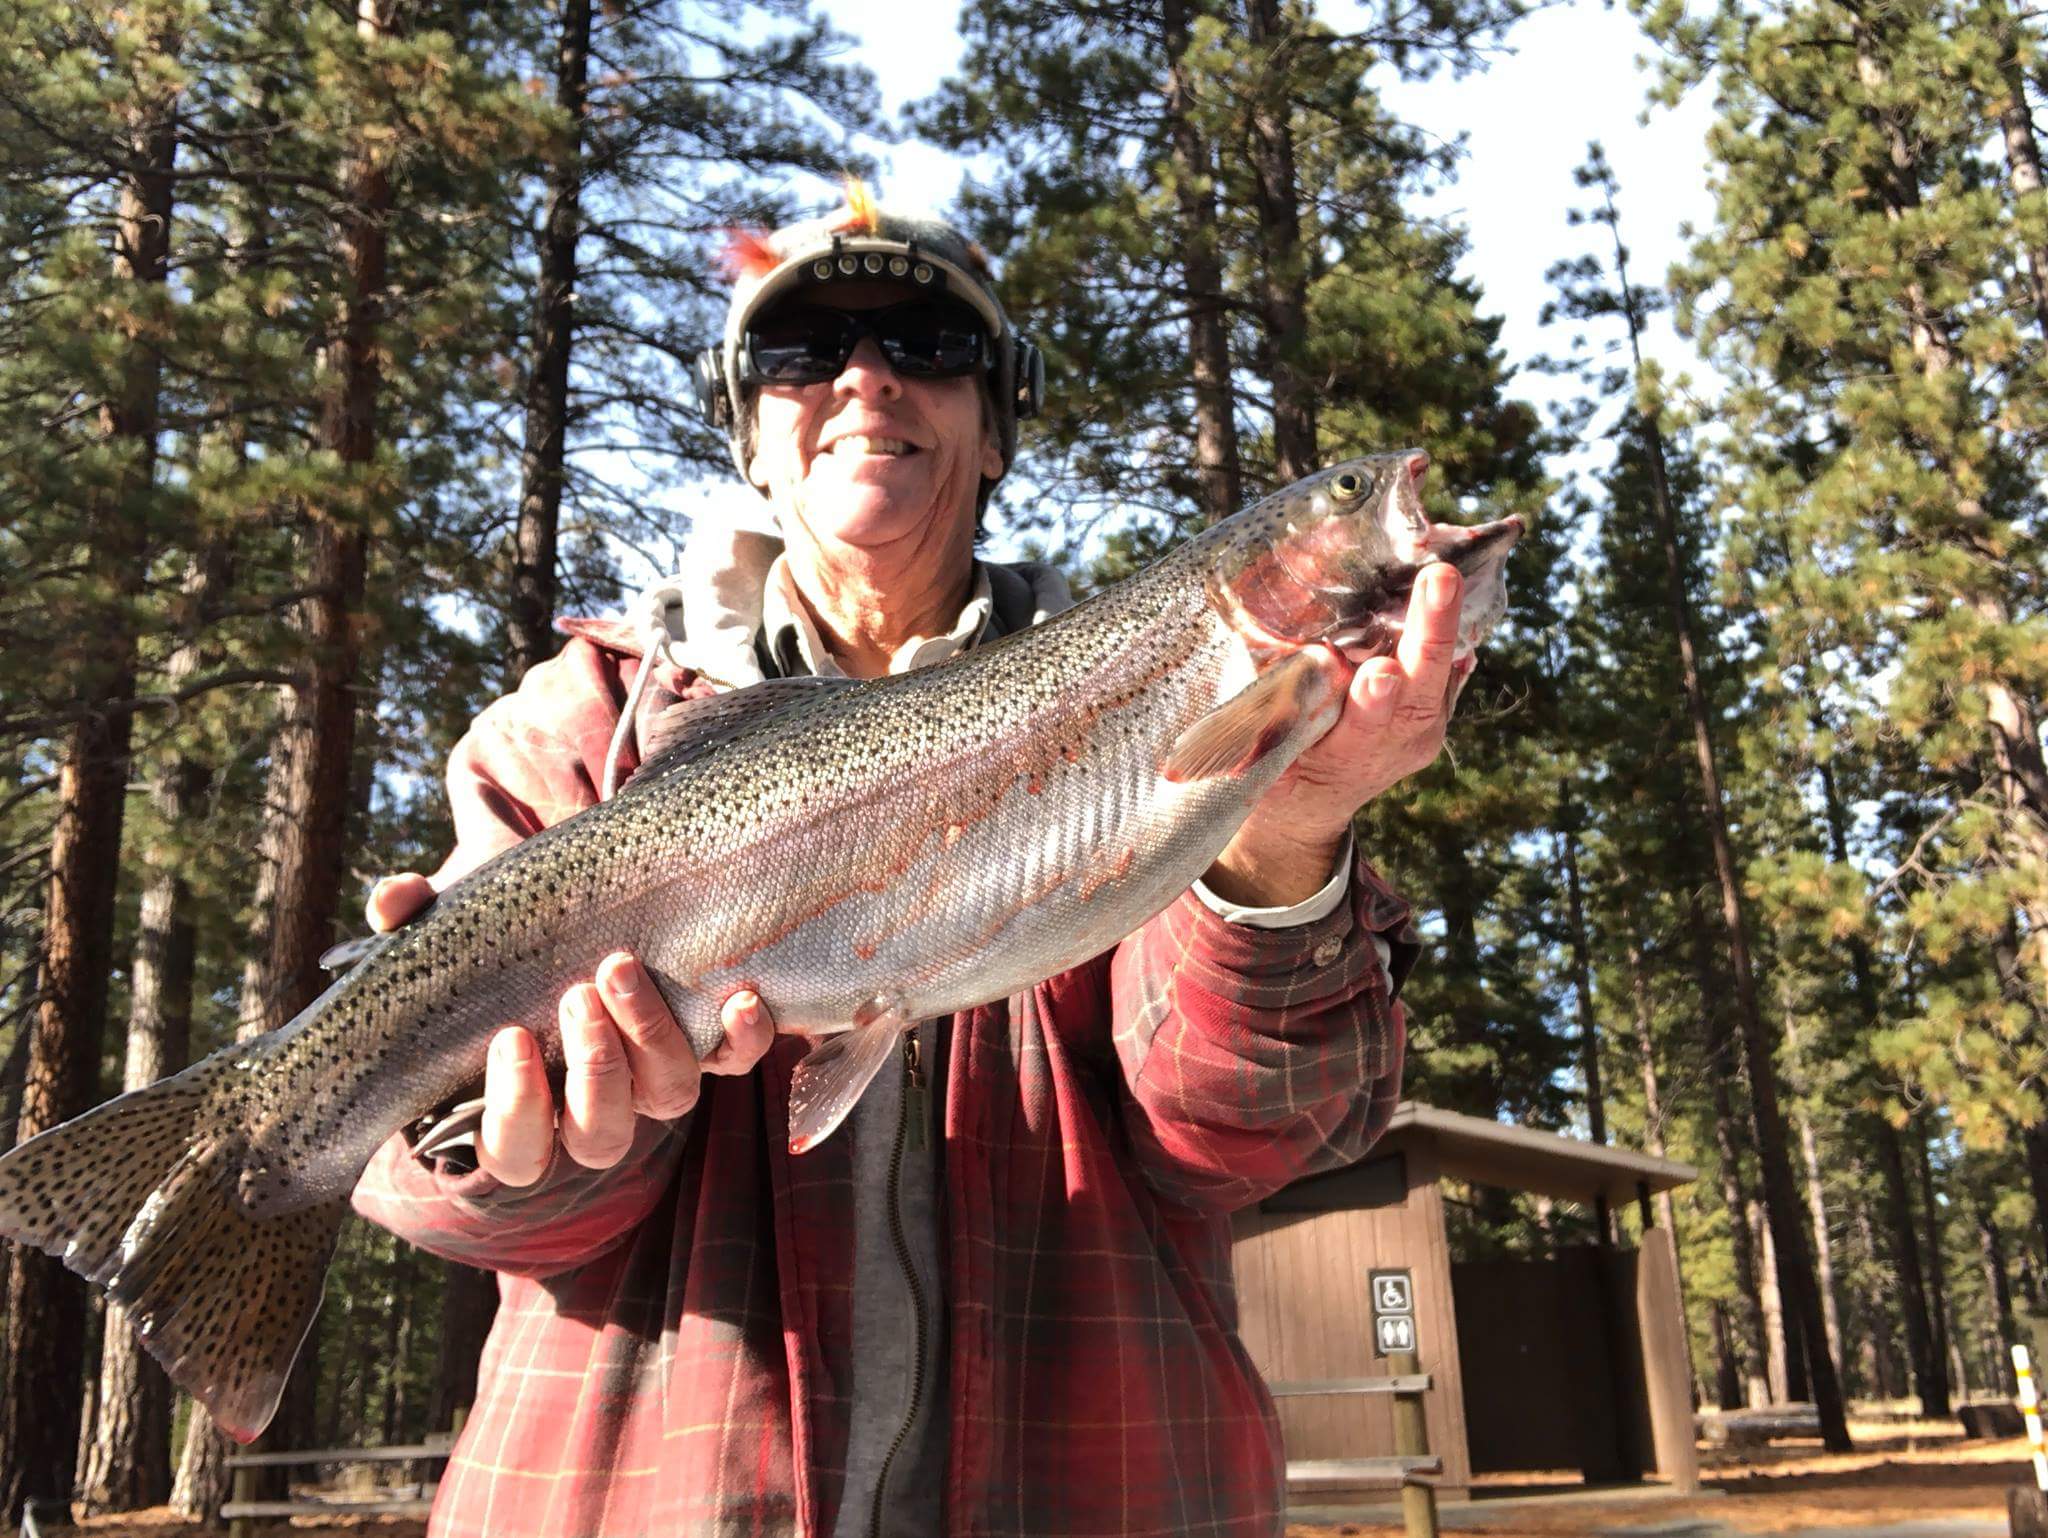 Val Aubrey's interview, Eagle Lake Fishing on the Barbless Podcast. —